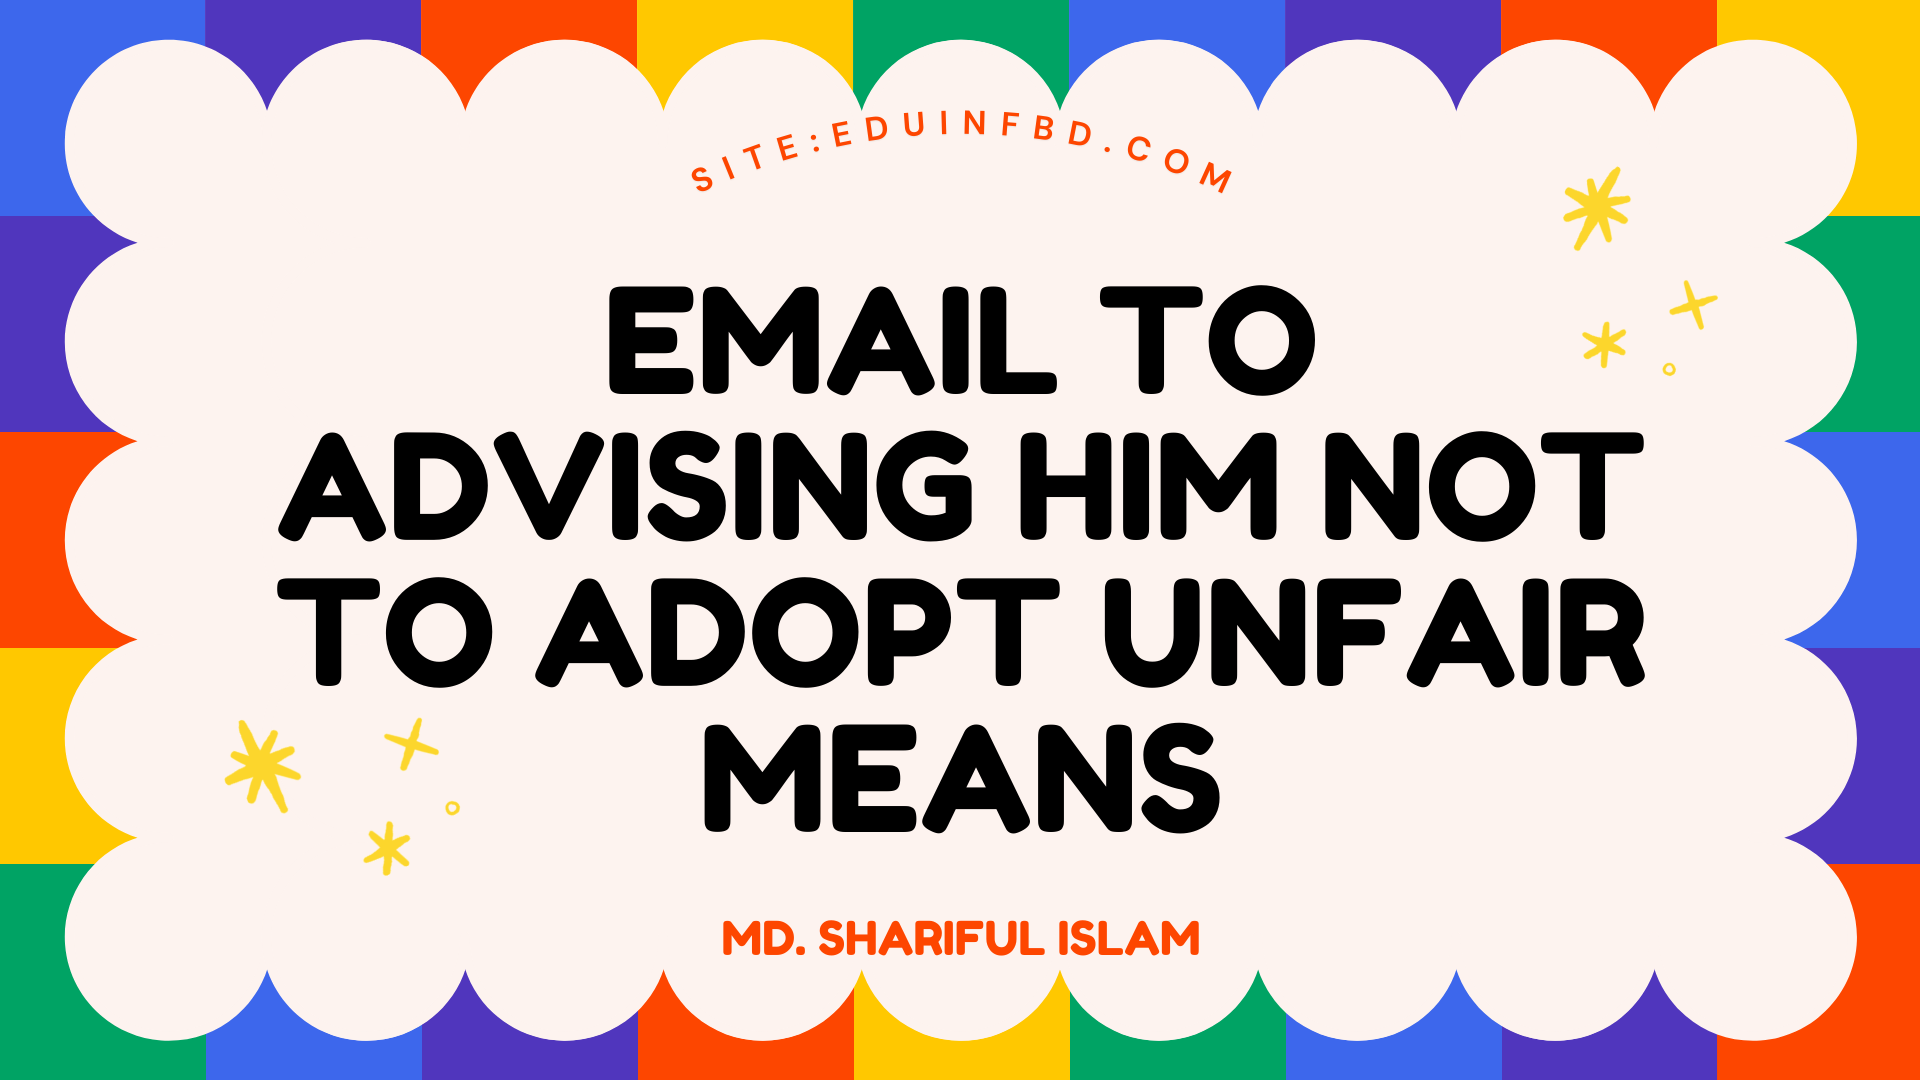 Email to advising him not to adopt unfair meansEmail to advising him not to adopt unfair means